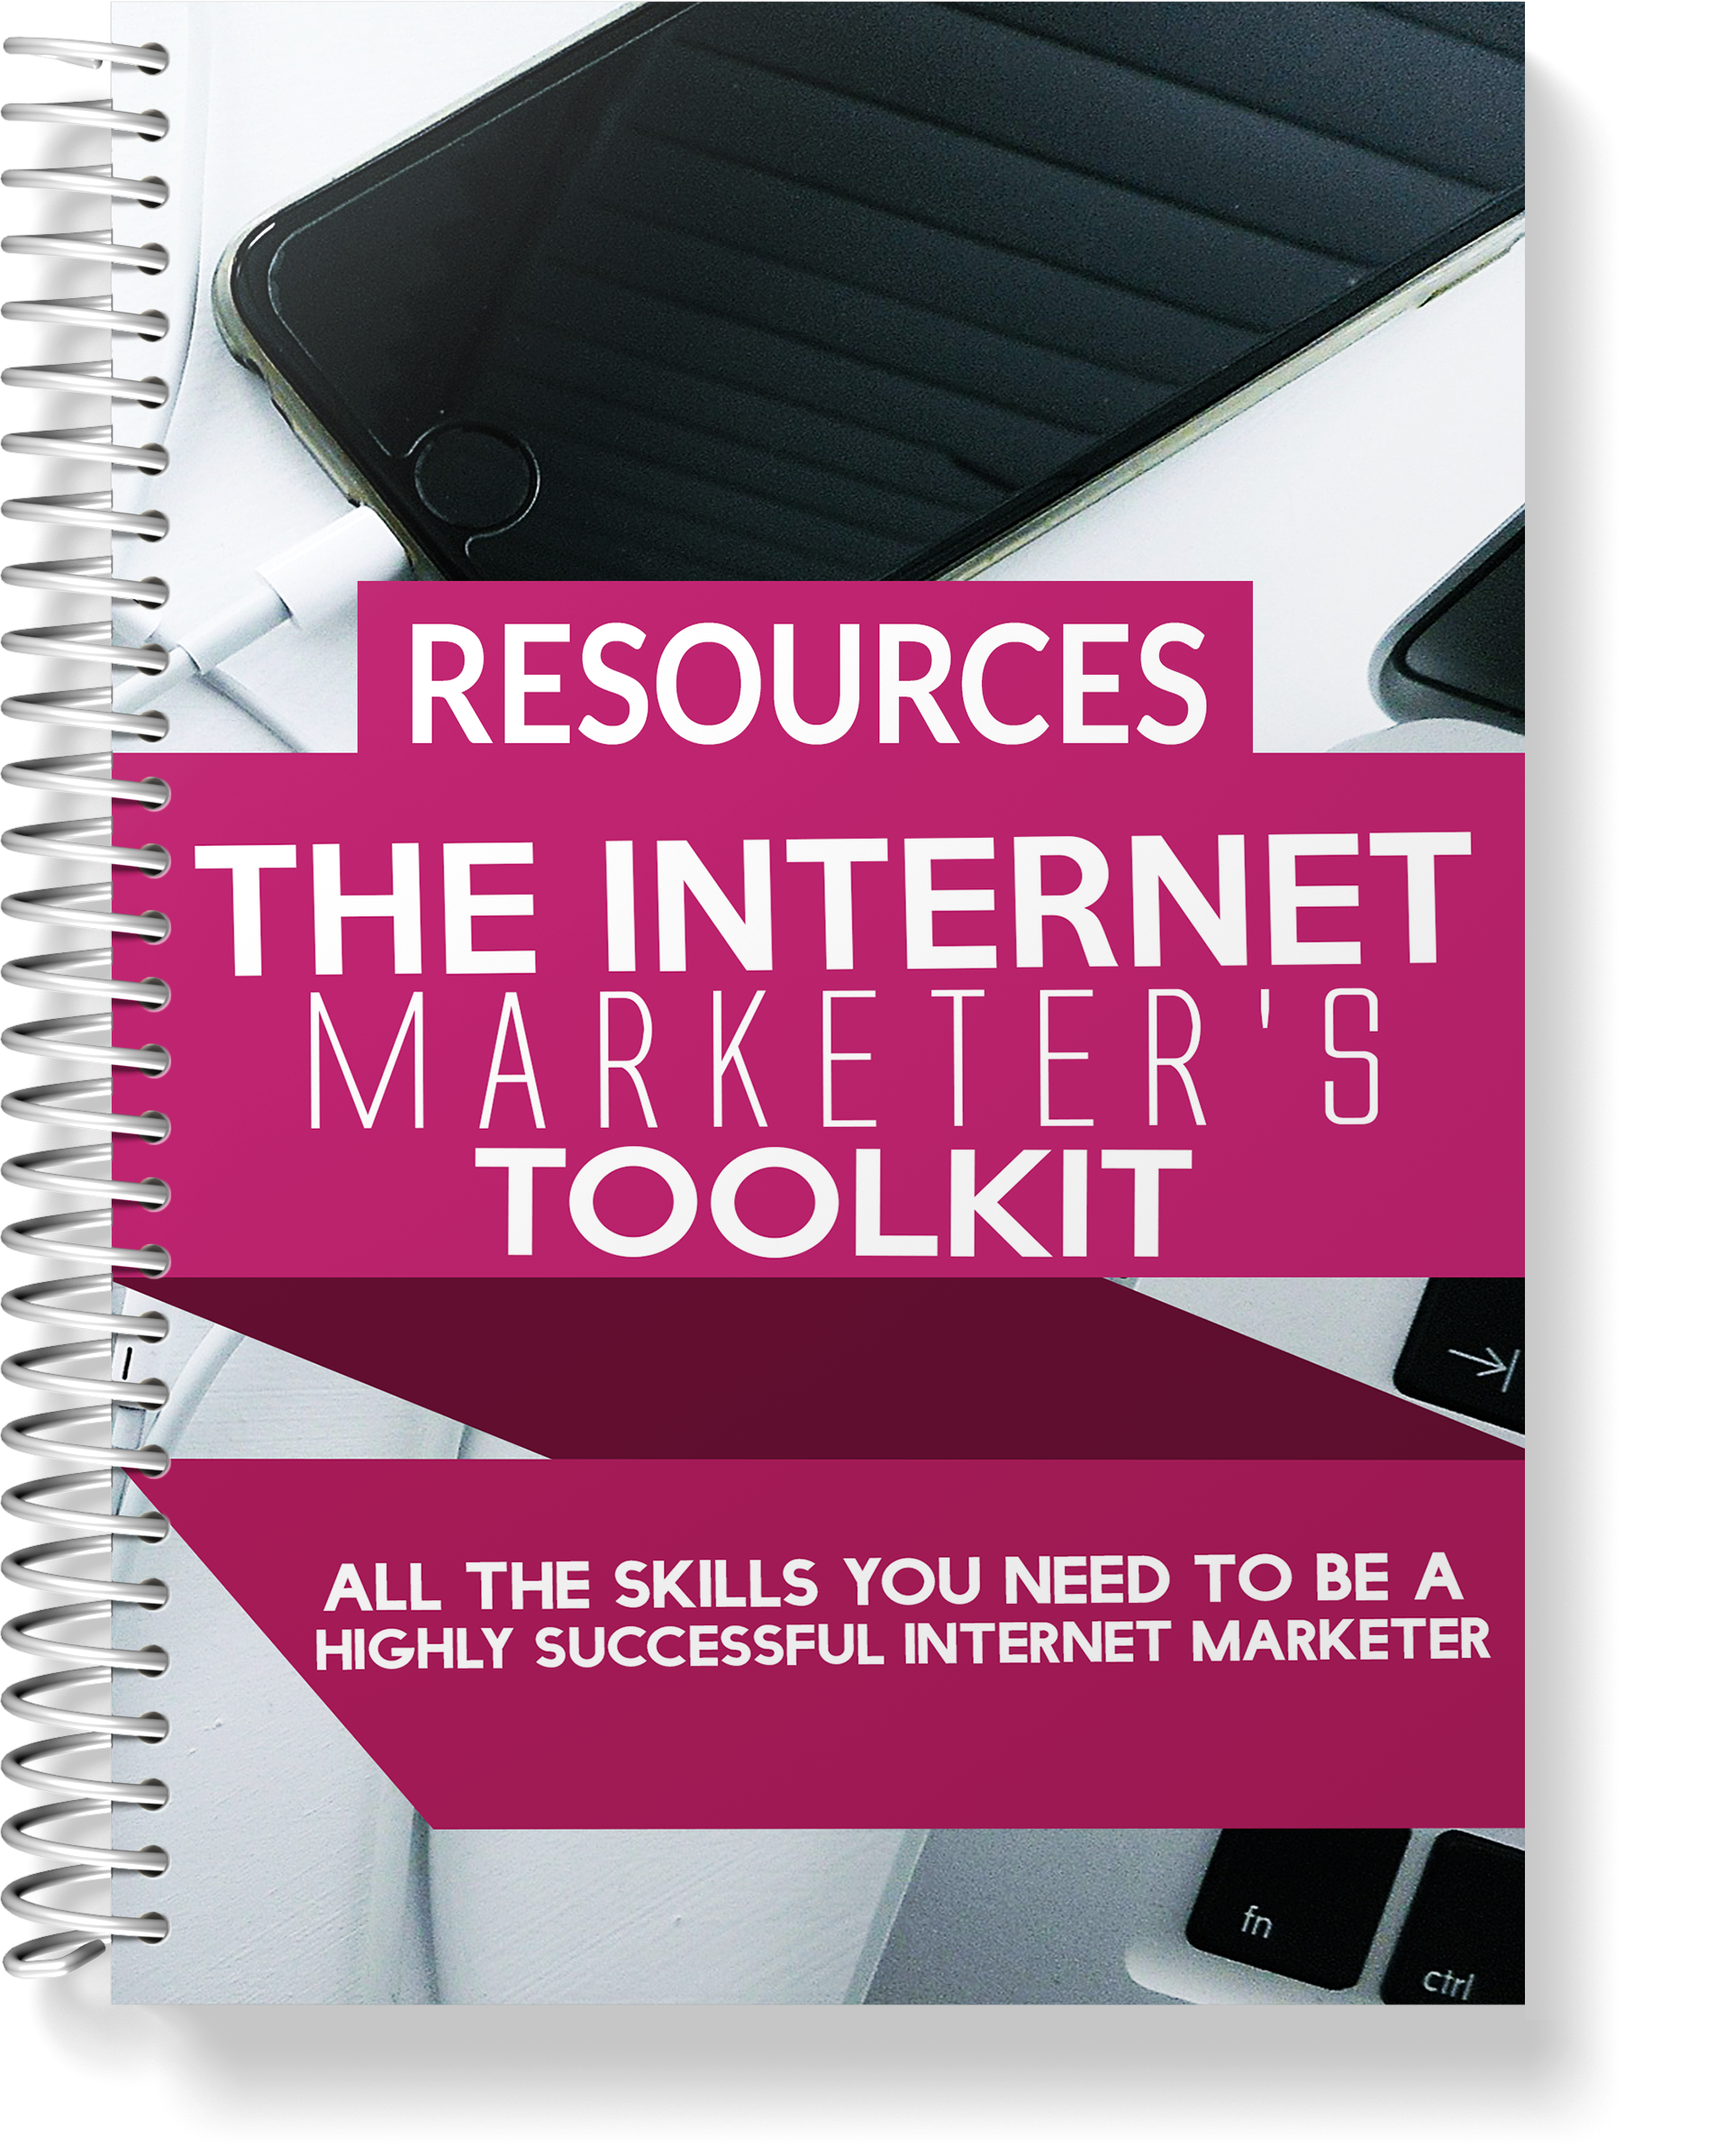 The Internet Marketer's Toolkit Resource Guide